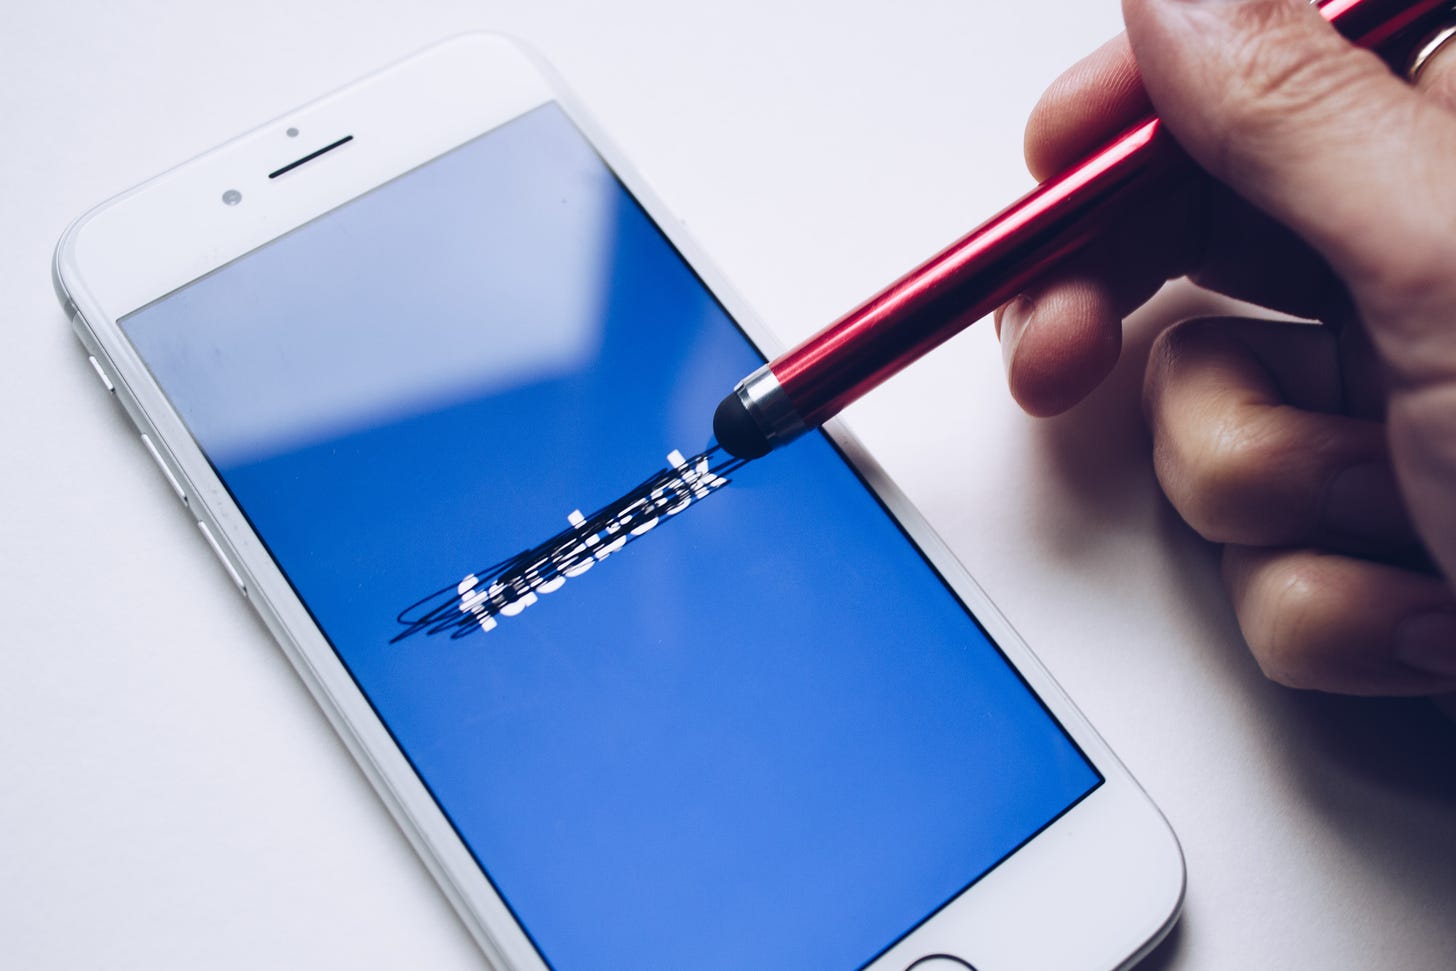 Photo of a pen crossing out the Facebook logo on a smartphone. (Unsplash)